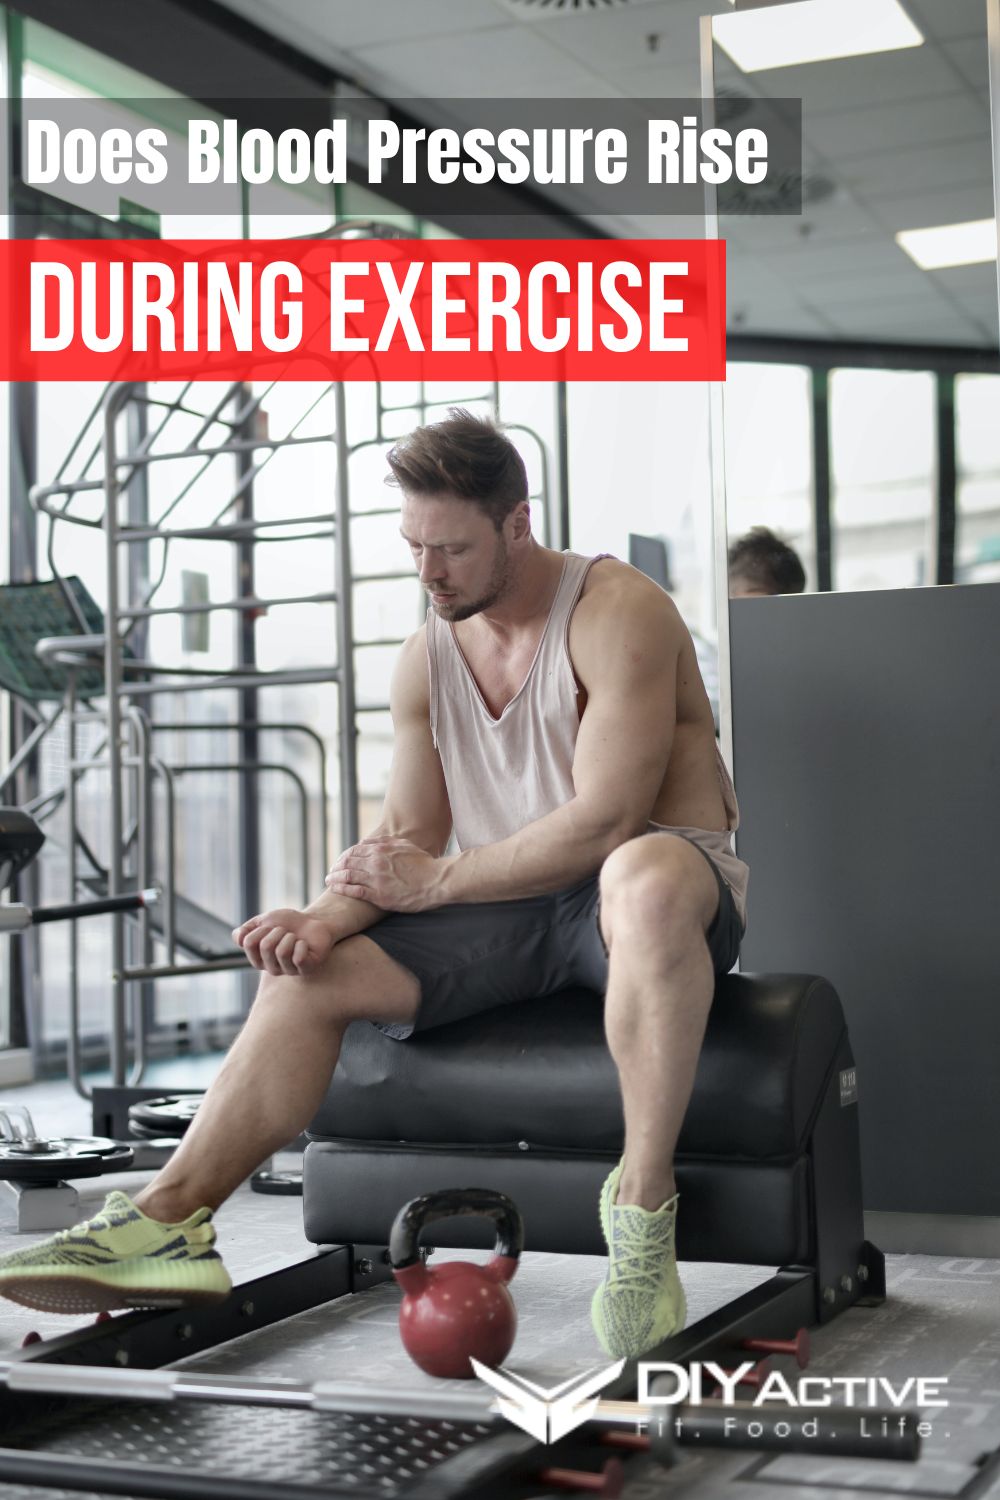 Does Blood Pressure Rise During Exercise?